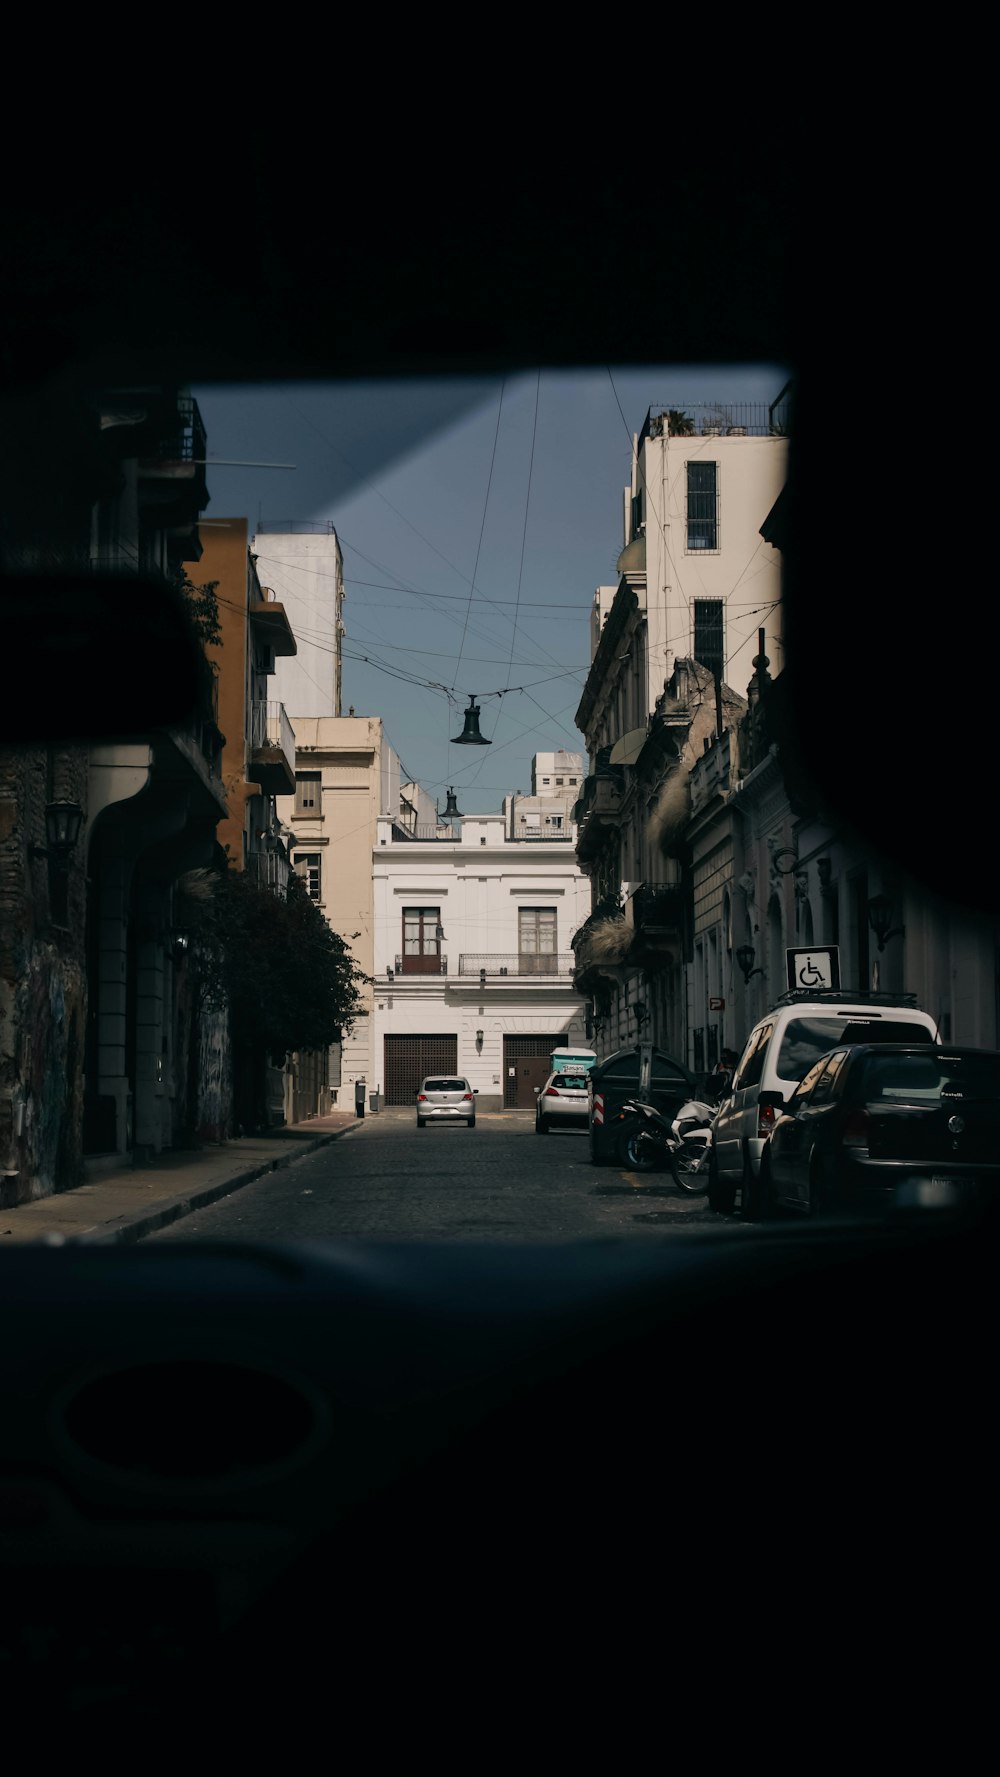 a view of a city street from inside a vehicle